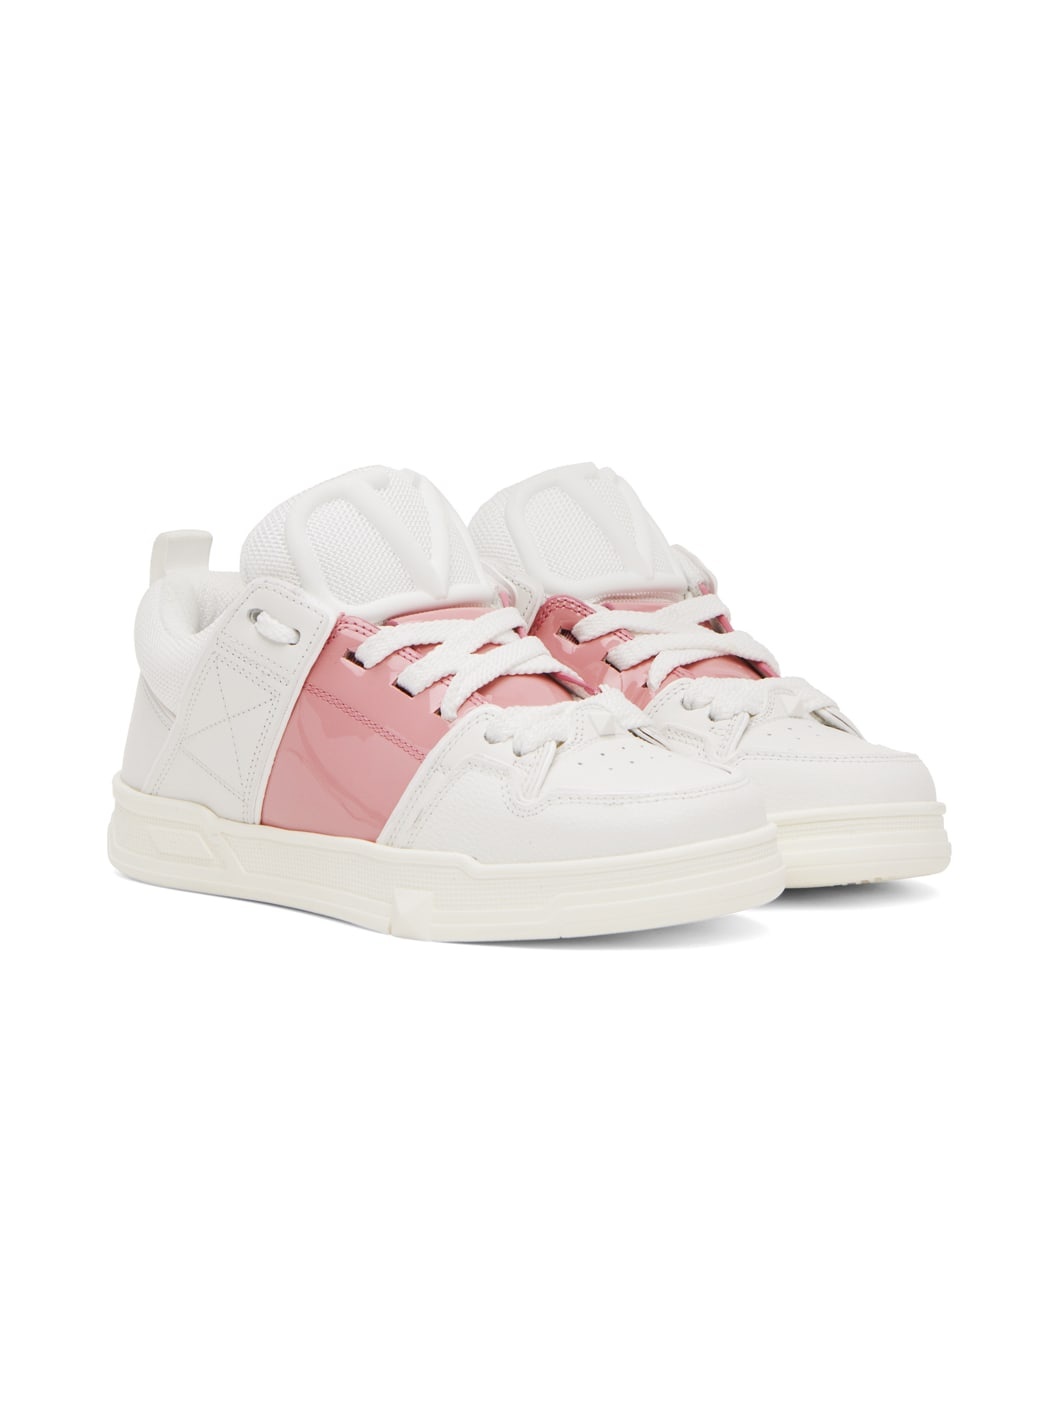 White & Pink Open Skate Sneakers - 4